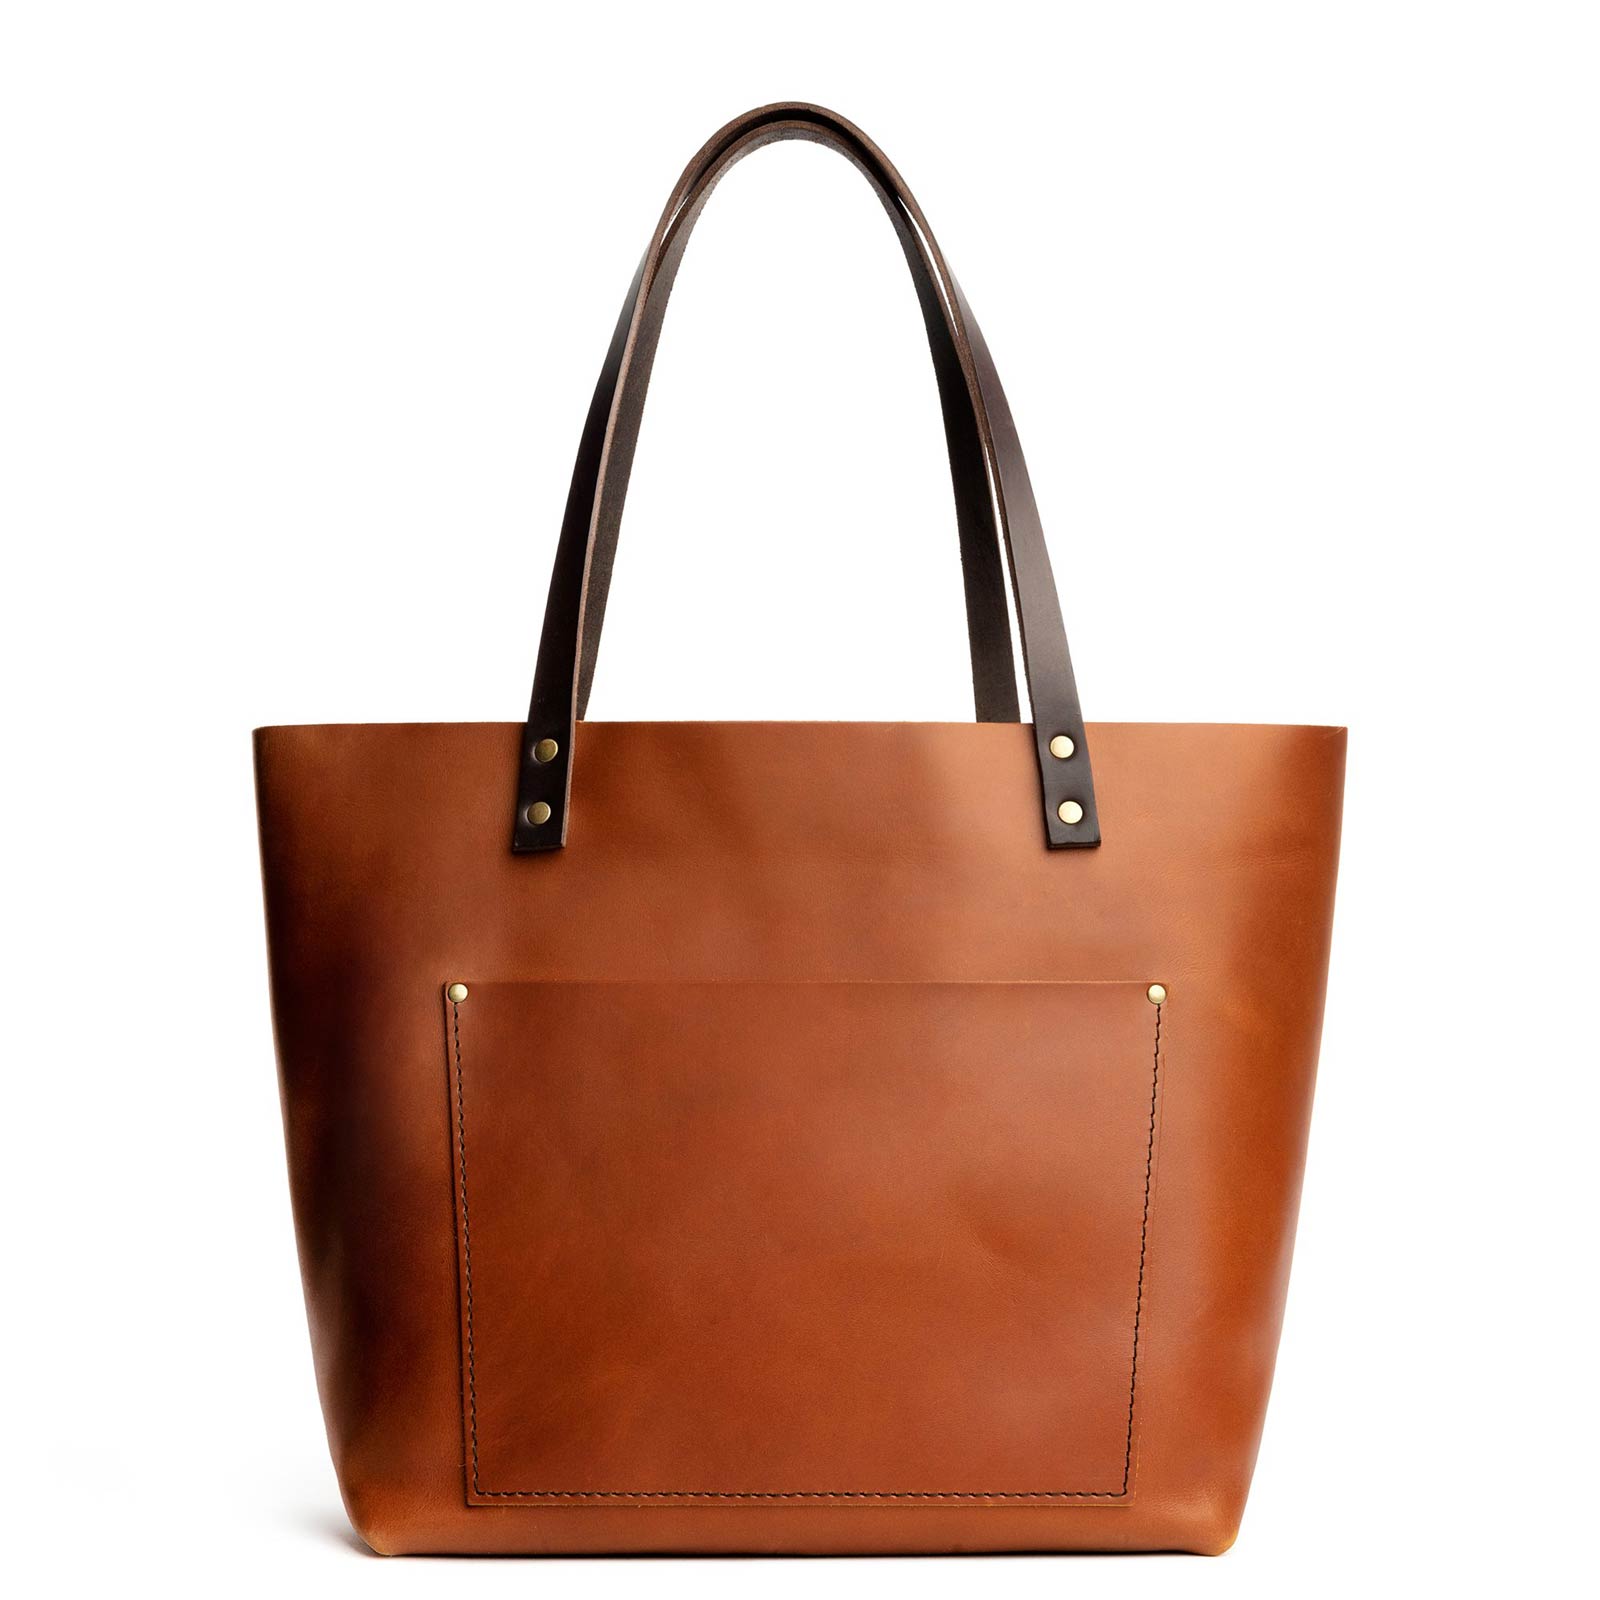 The Leather Tote Bag Collection